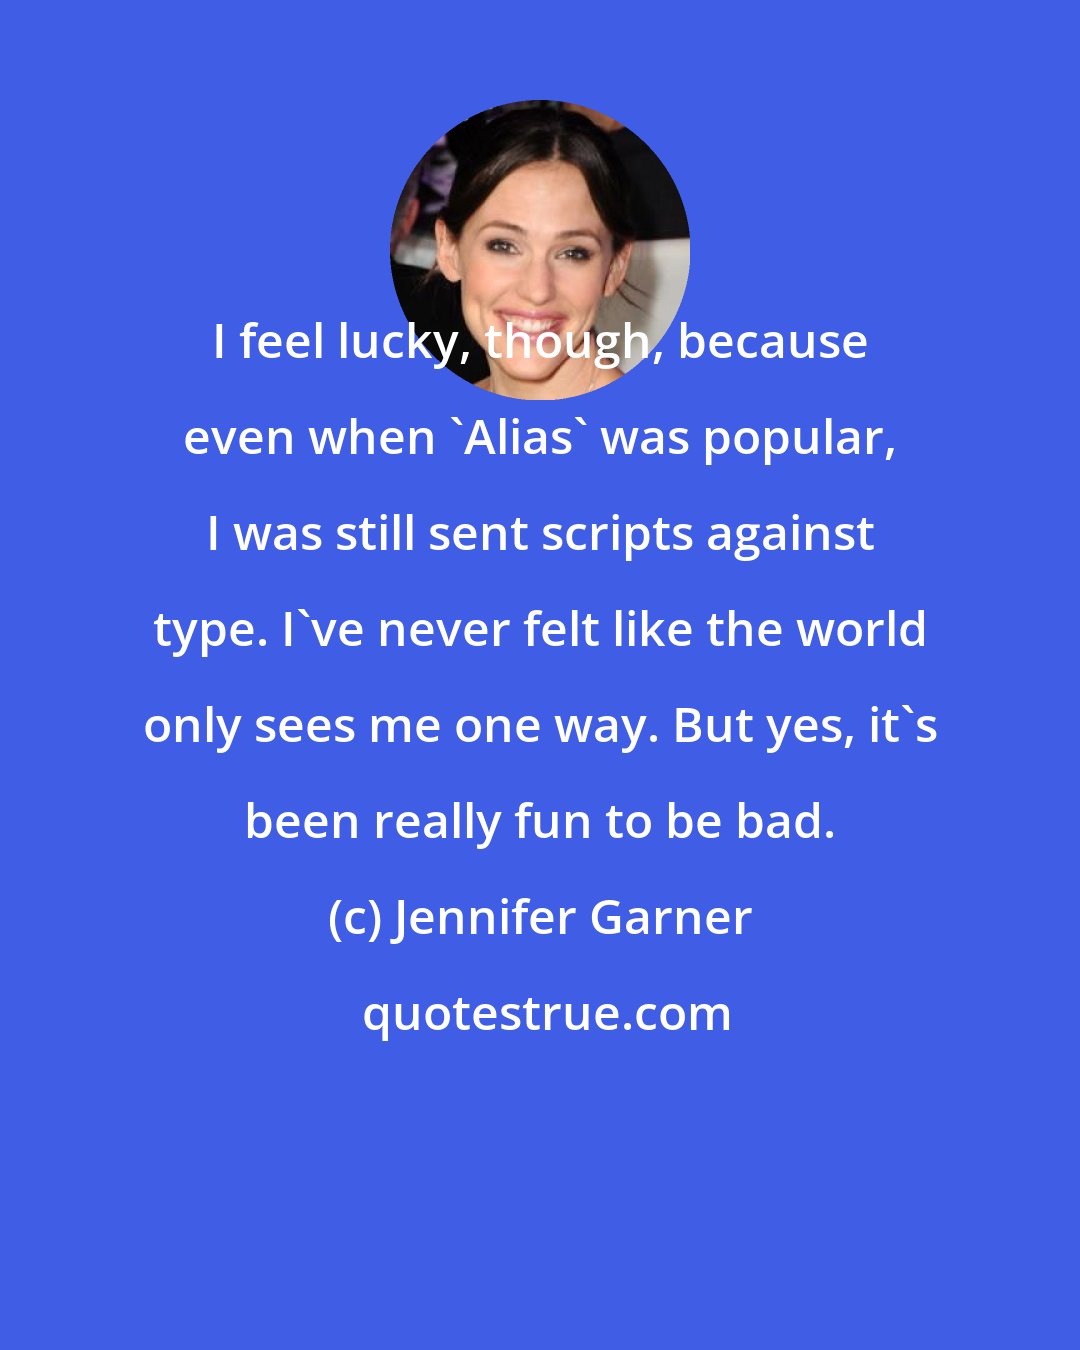 Jennifer Garner: I feel lucky, though, because even when 'Alias' was popular, I was still sent scripts against type. I've never felt like the world only sees me one way. But yes, it's been really fun to be bad.